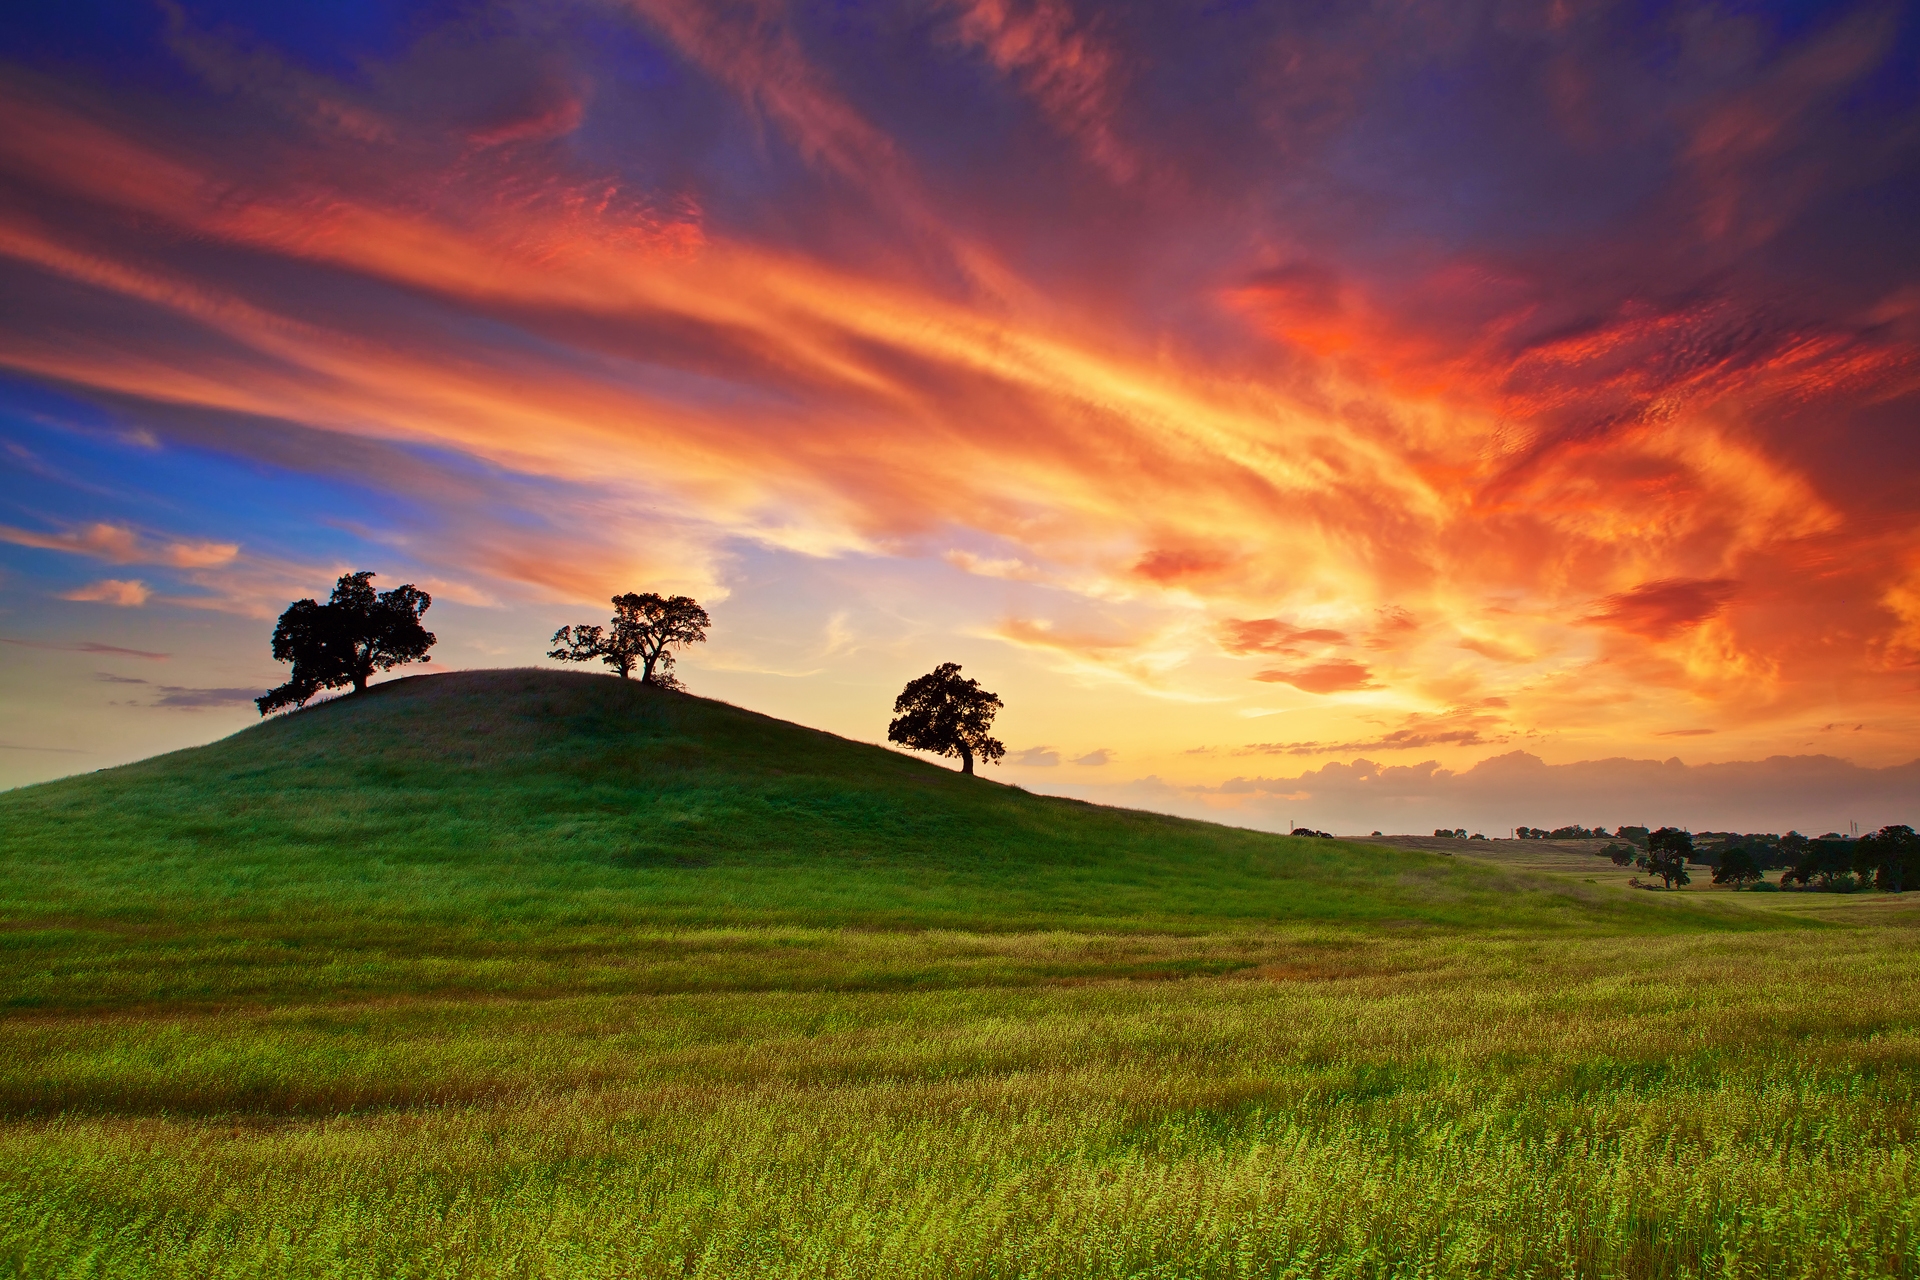 spring, usa, california, trees, field, sunset, nature, grass, sky, clouds, united states, may